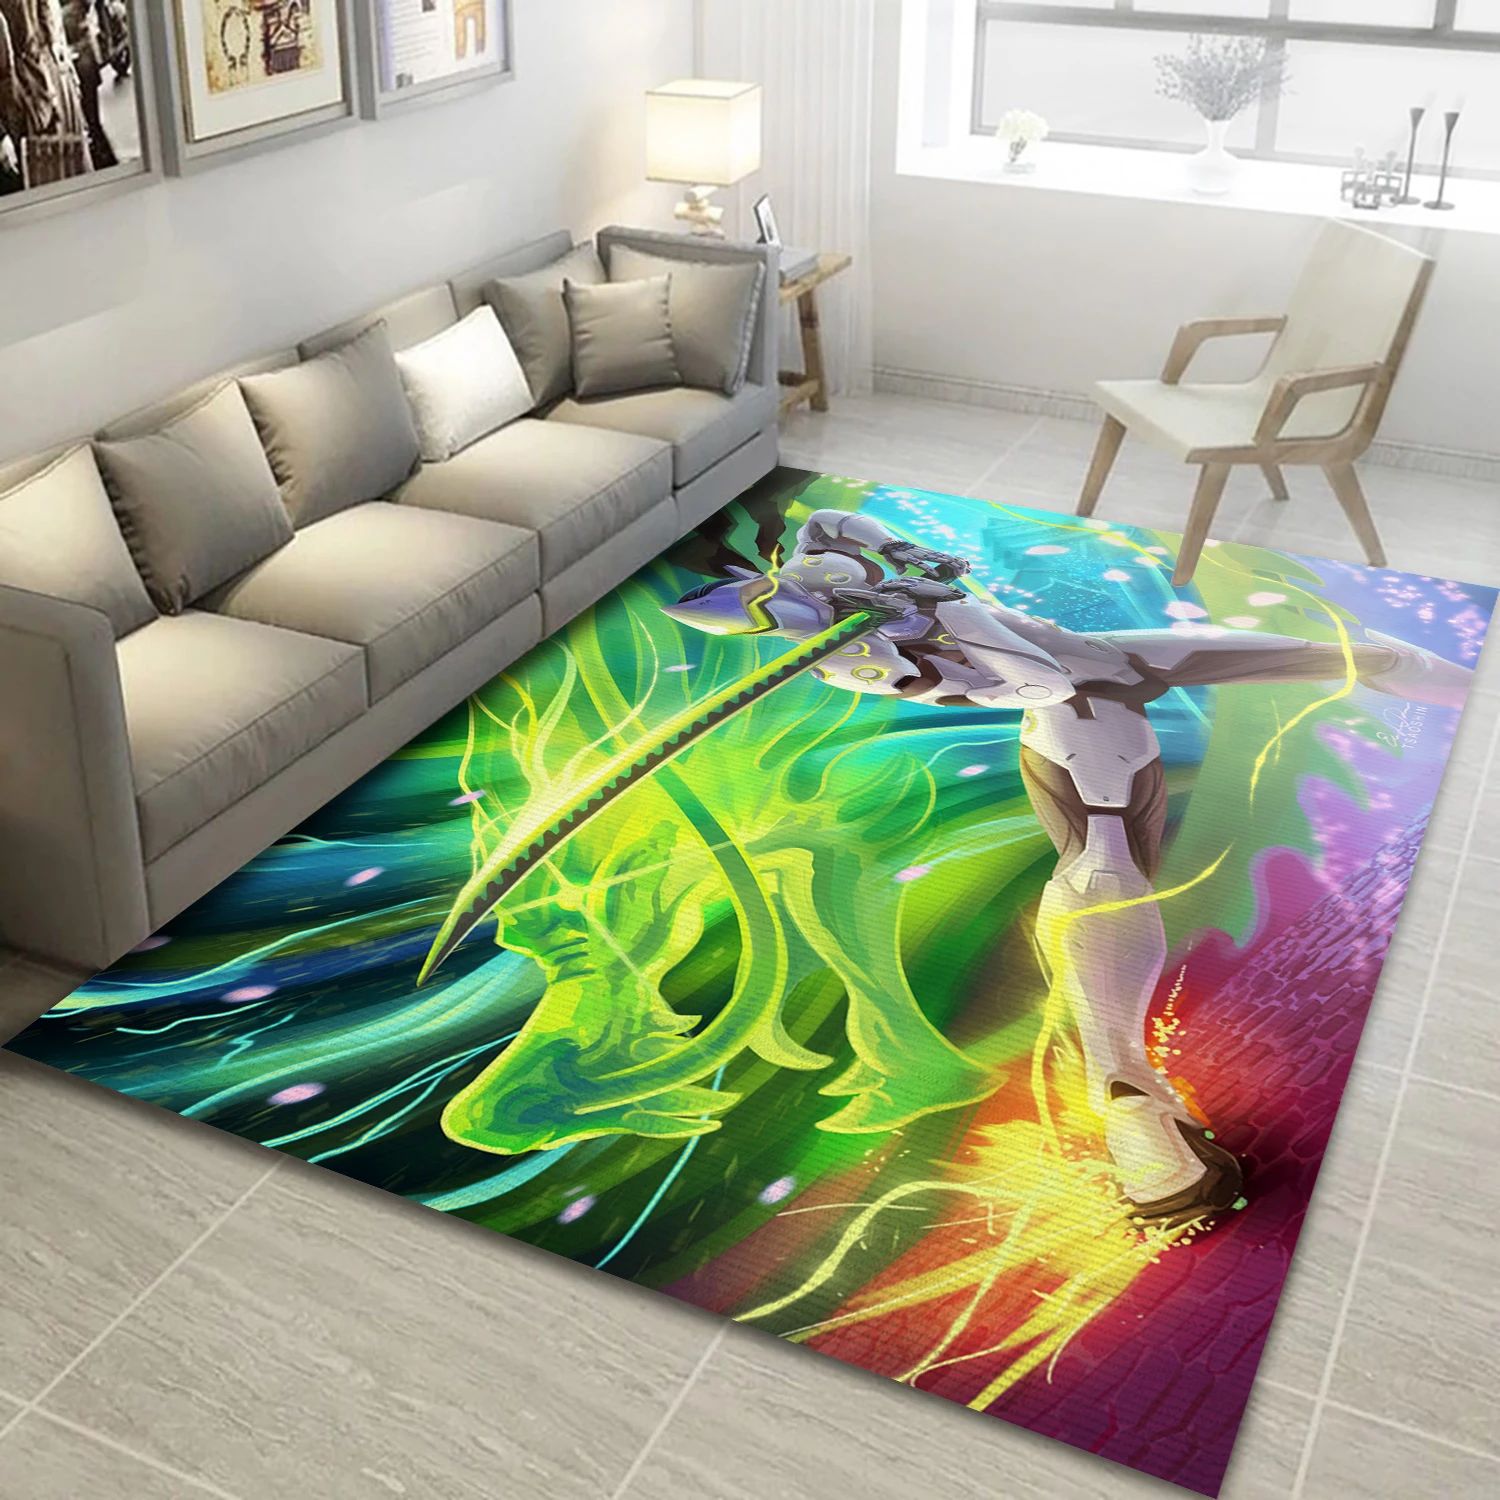 Dragon Blade Genji Video Game Area Rug For Christmas, Living Room Rug - Home Decor Floor Decor - Indoor Outdoor Rugs